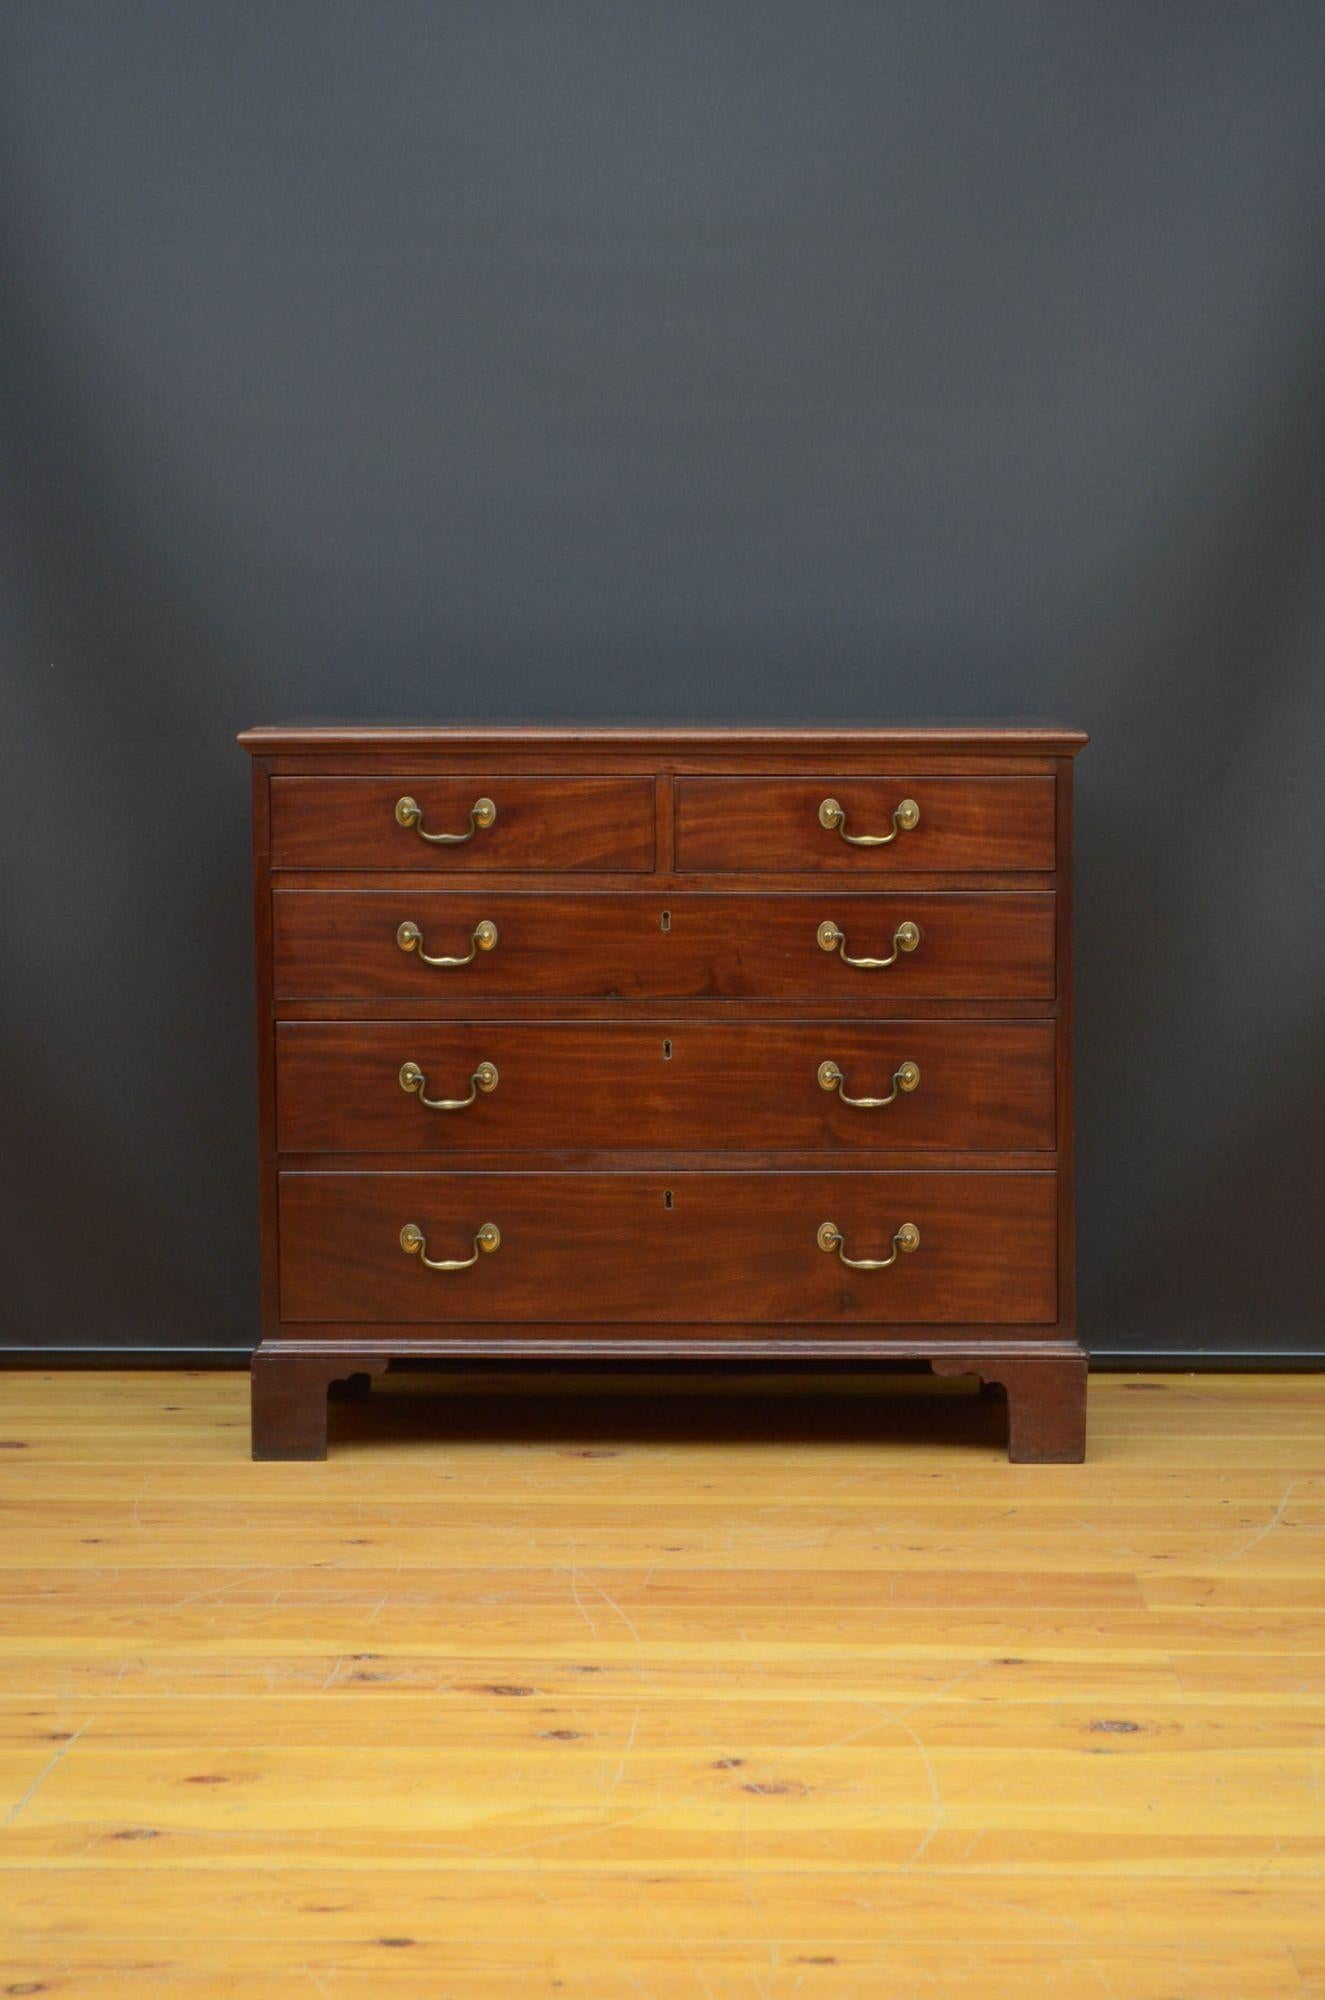 Sn5465 Elegant Georgian chest of drawers in mahogany, having figured mahogany top with moulded edge above two short and three long drawers, all fitted with original swan neck brass handles, standing on original bracket feet. This antique chest of